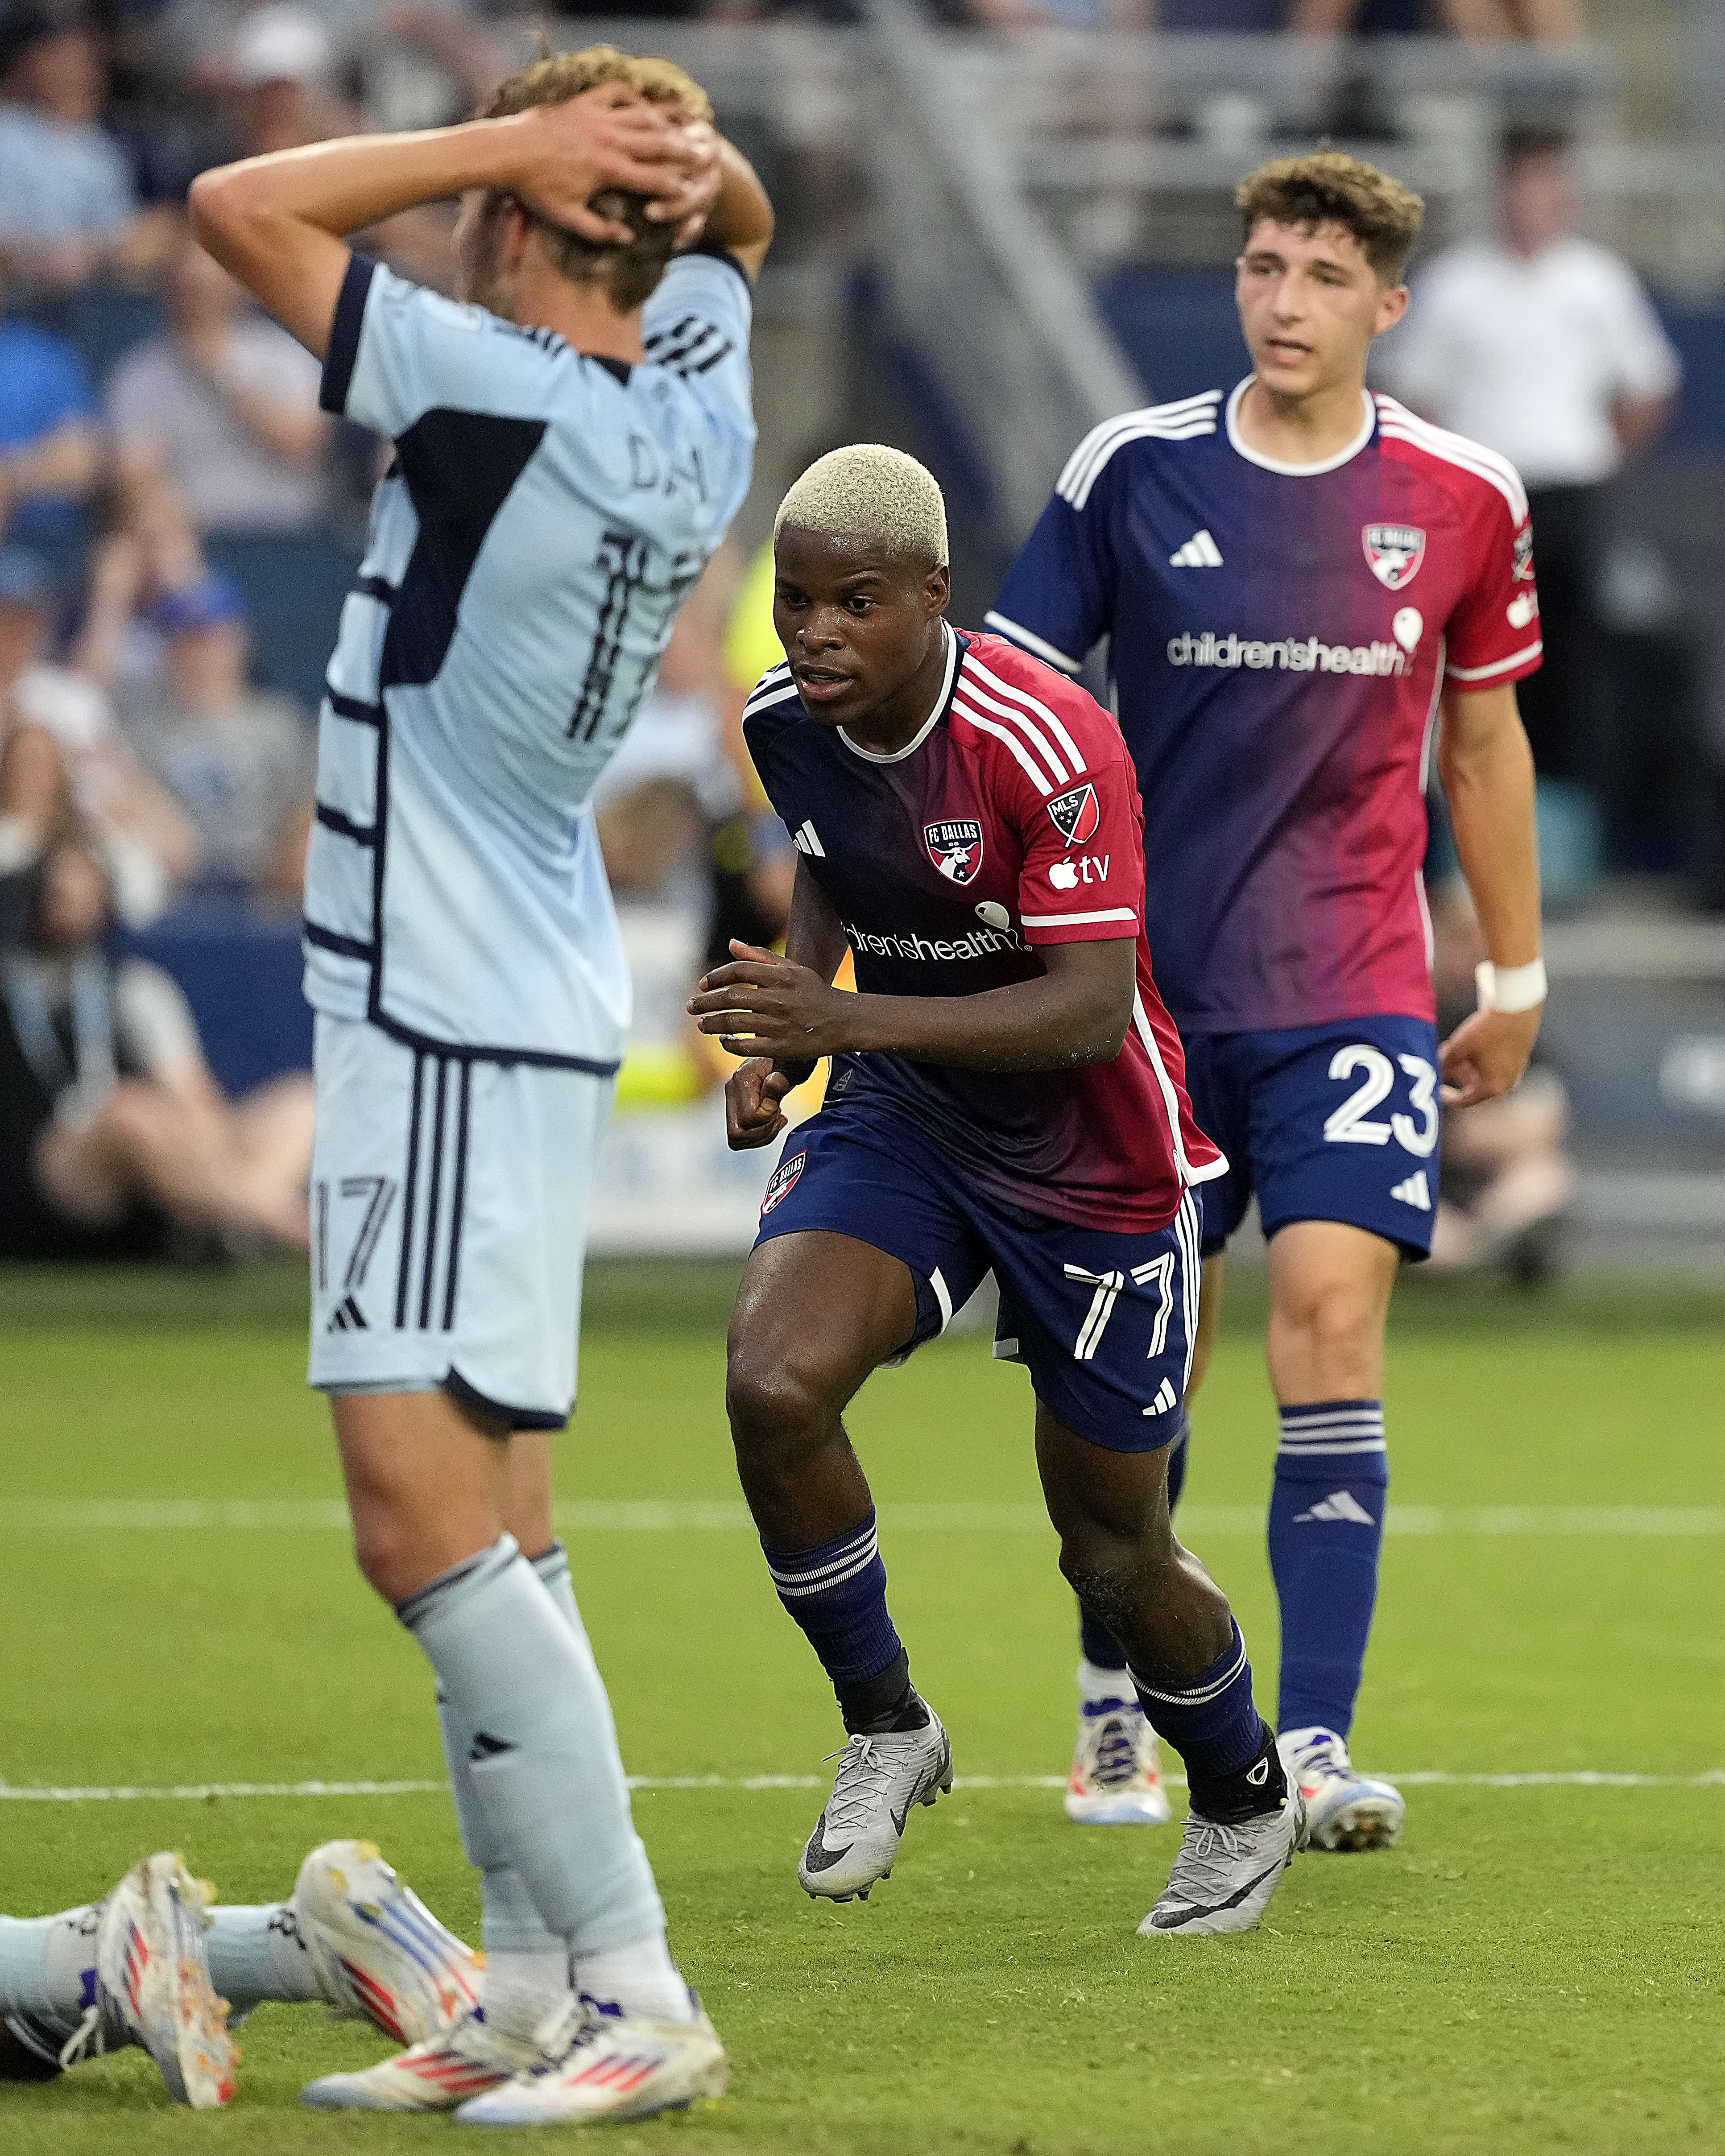 Willy Agada, Memo Rodríguez propel Sporting KC to 3-2 victory over Dallas